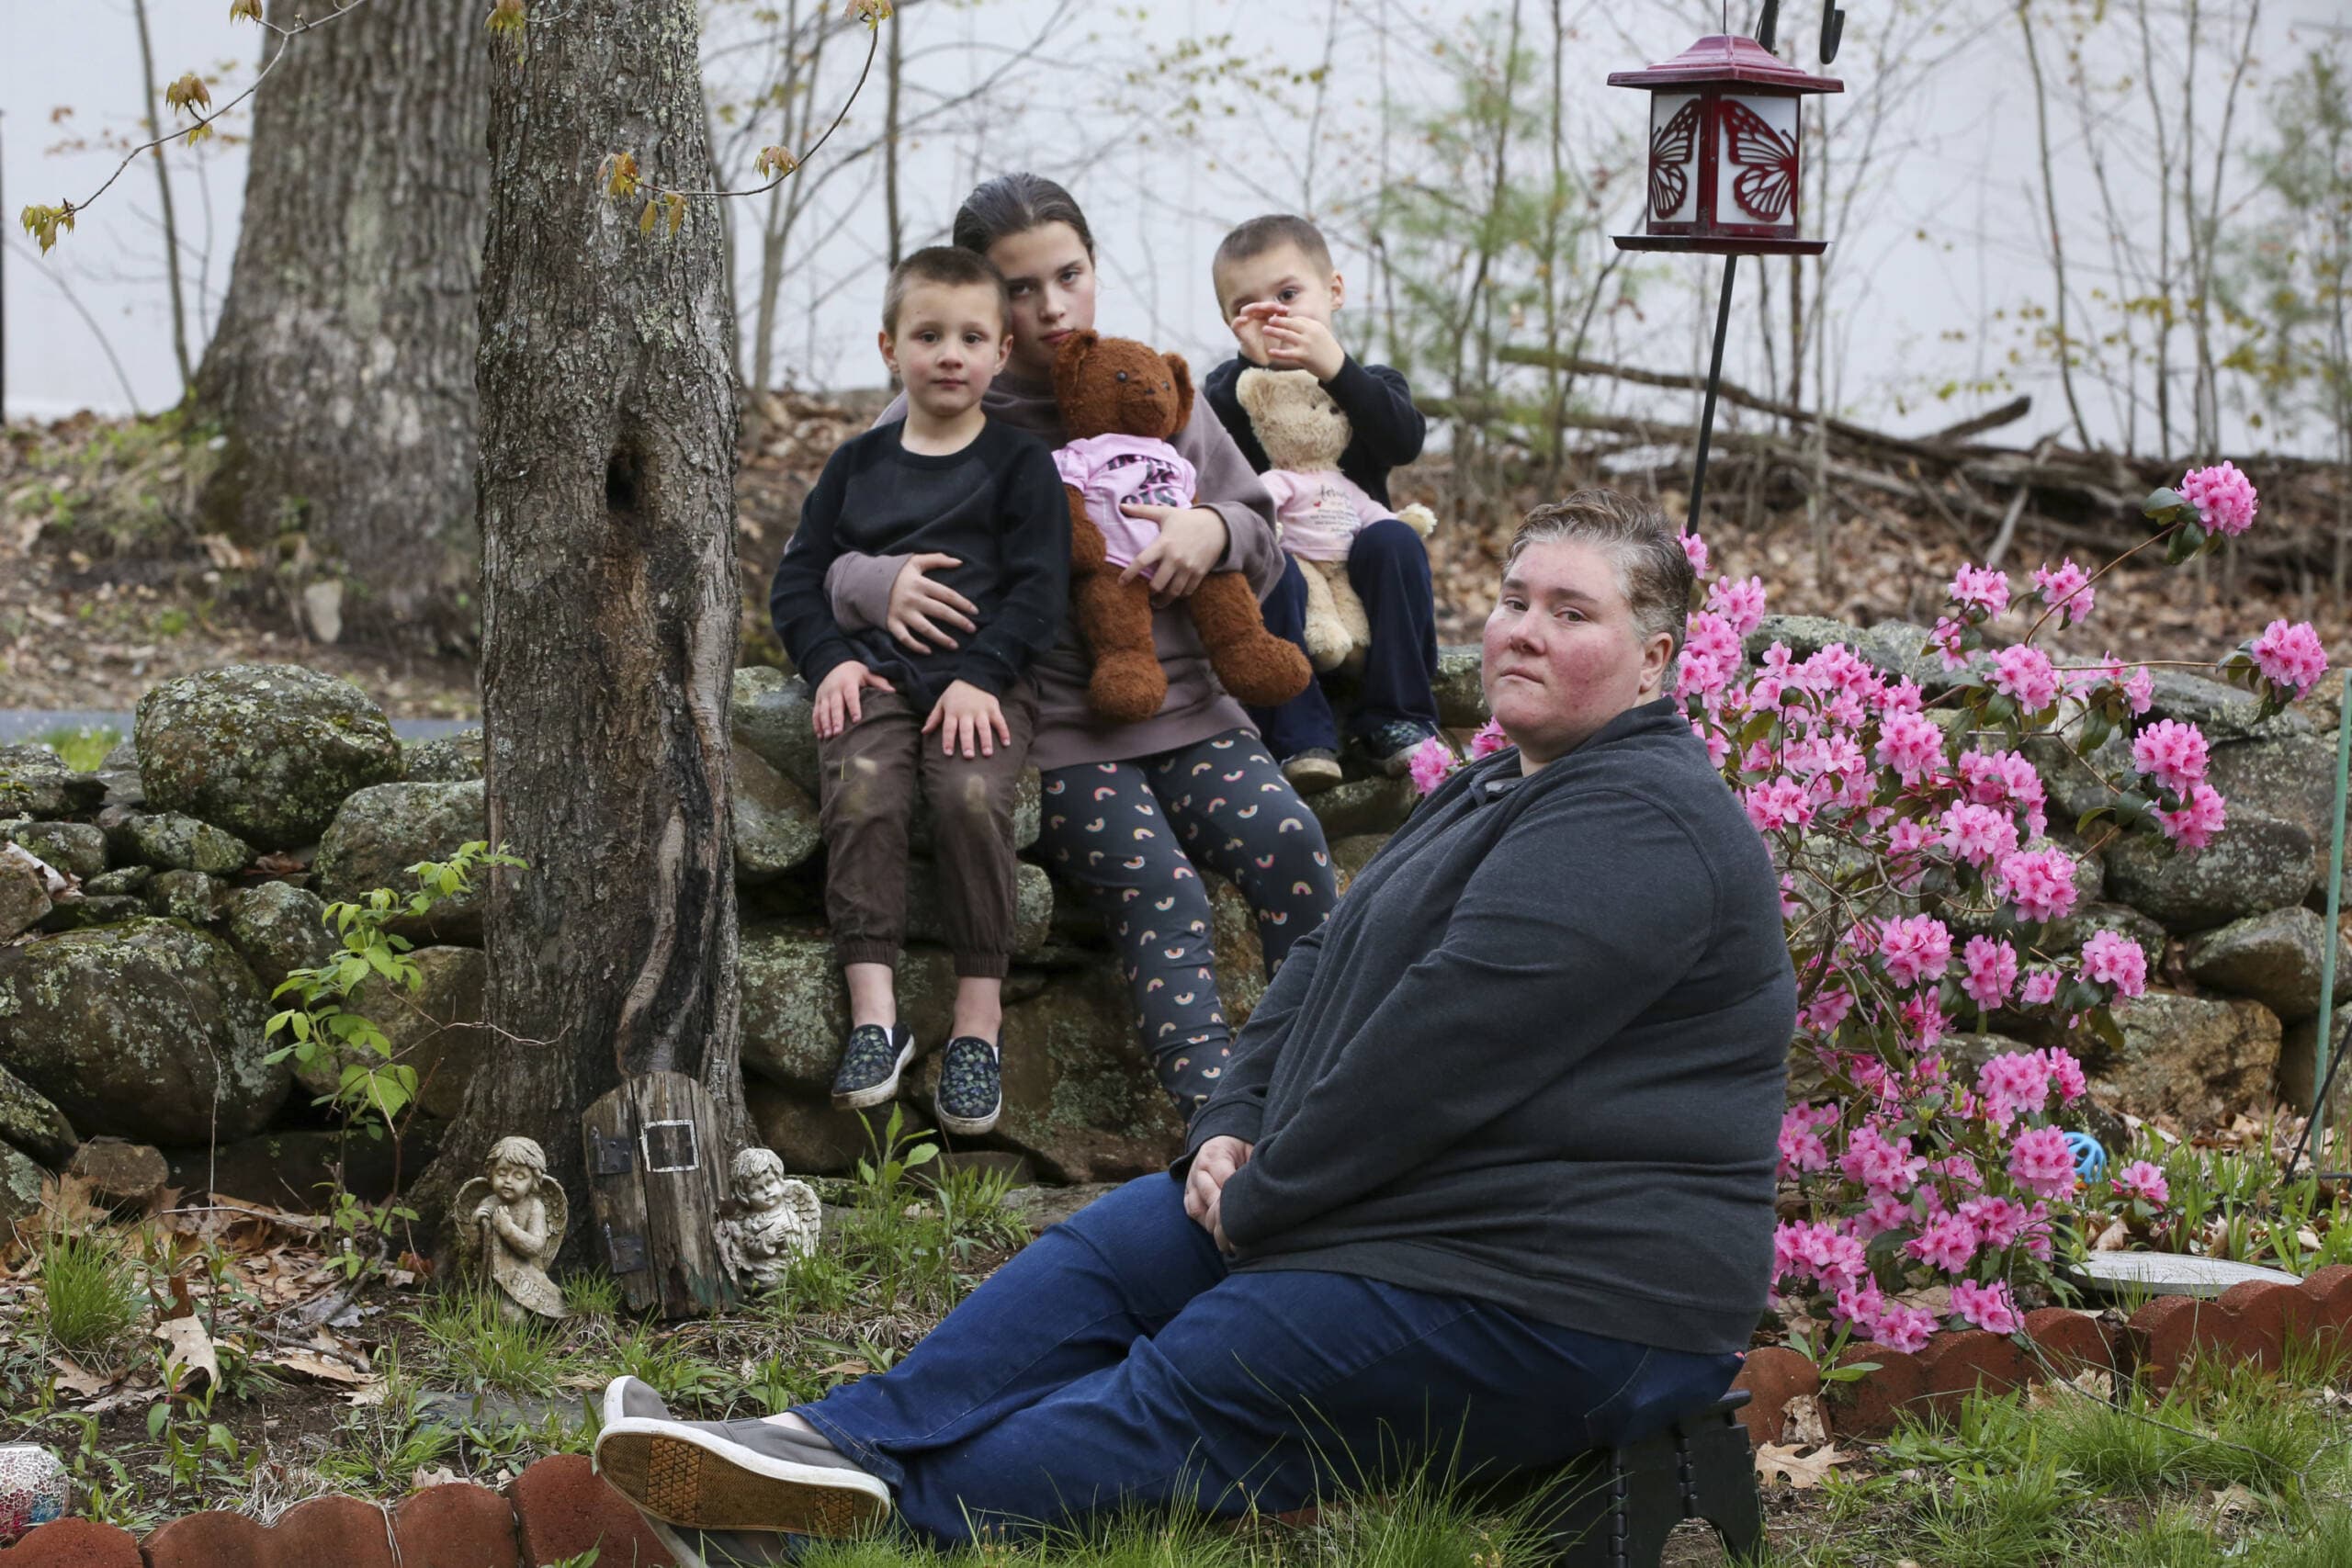 Jillian Philips poses with her children, Macy, 10, and 4-year old twins, Jude and Emmett, right, in a memorial garden at her home, Tuesday, May 2, 2023, in North Brookfield, Mass. The remains her 5 day old child Emilia and buried there along with remains of her 2016 miscarriage. (Reba Saldanha/AP)